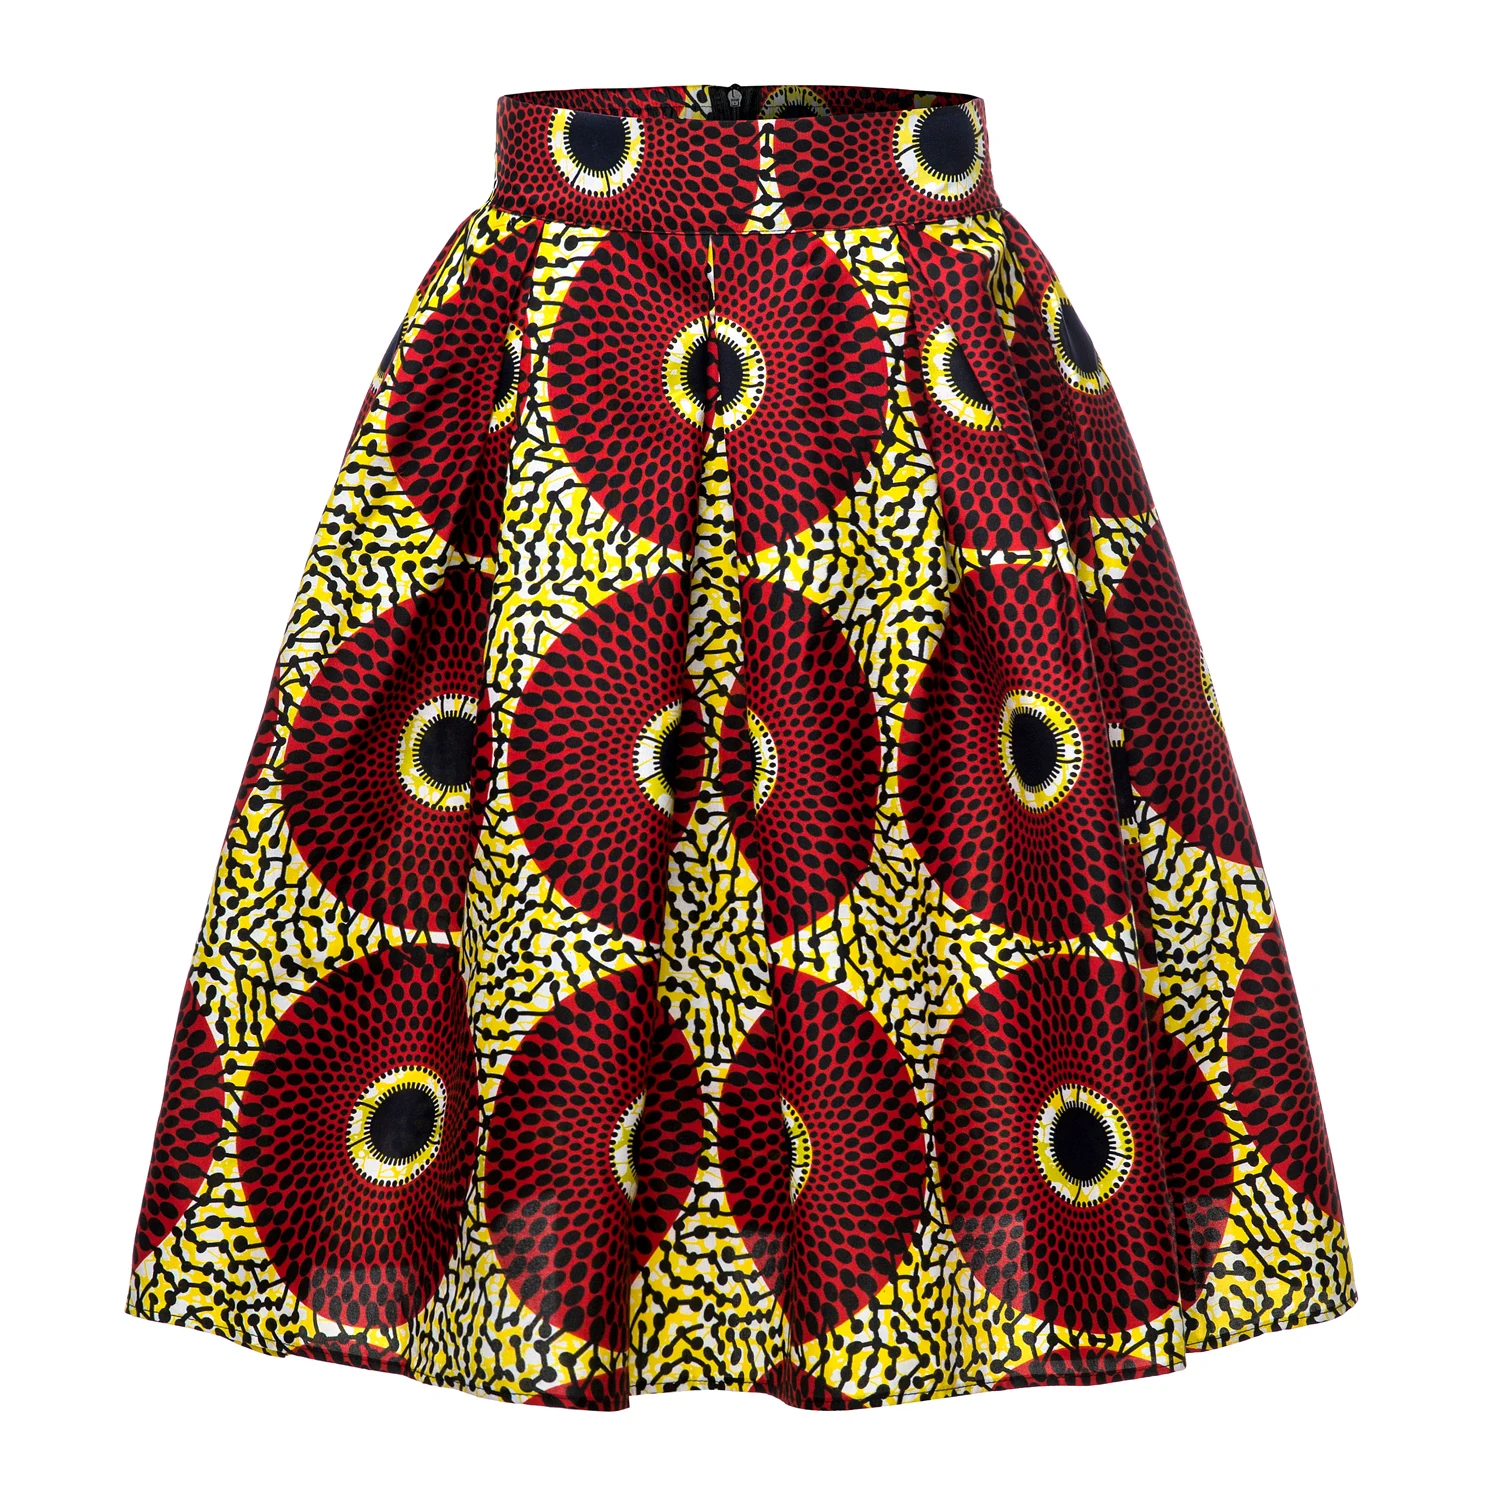 

ZH099 Stylish African Kitenge Print Design Long Skirt Women Casual Skirt For Dating, Multi as pictures or as customization